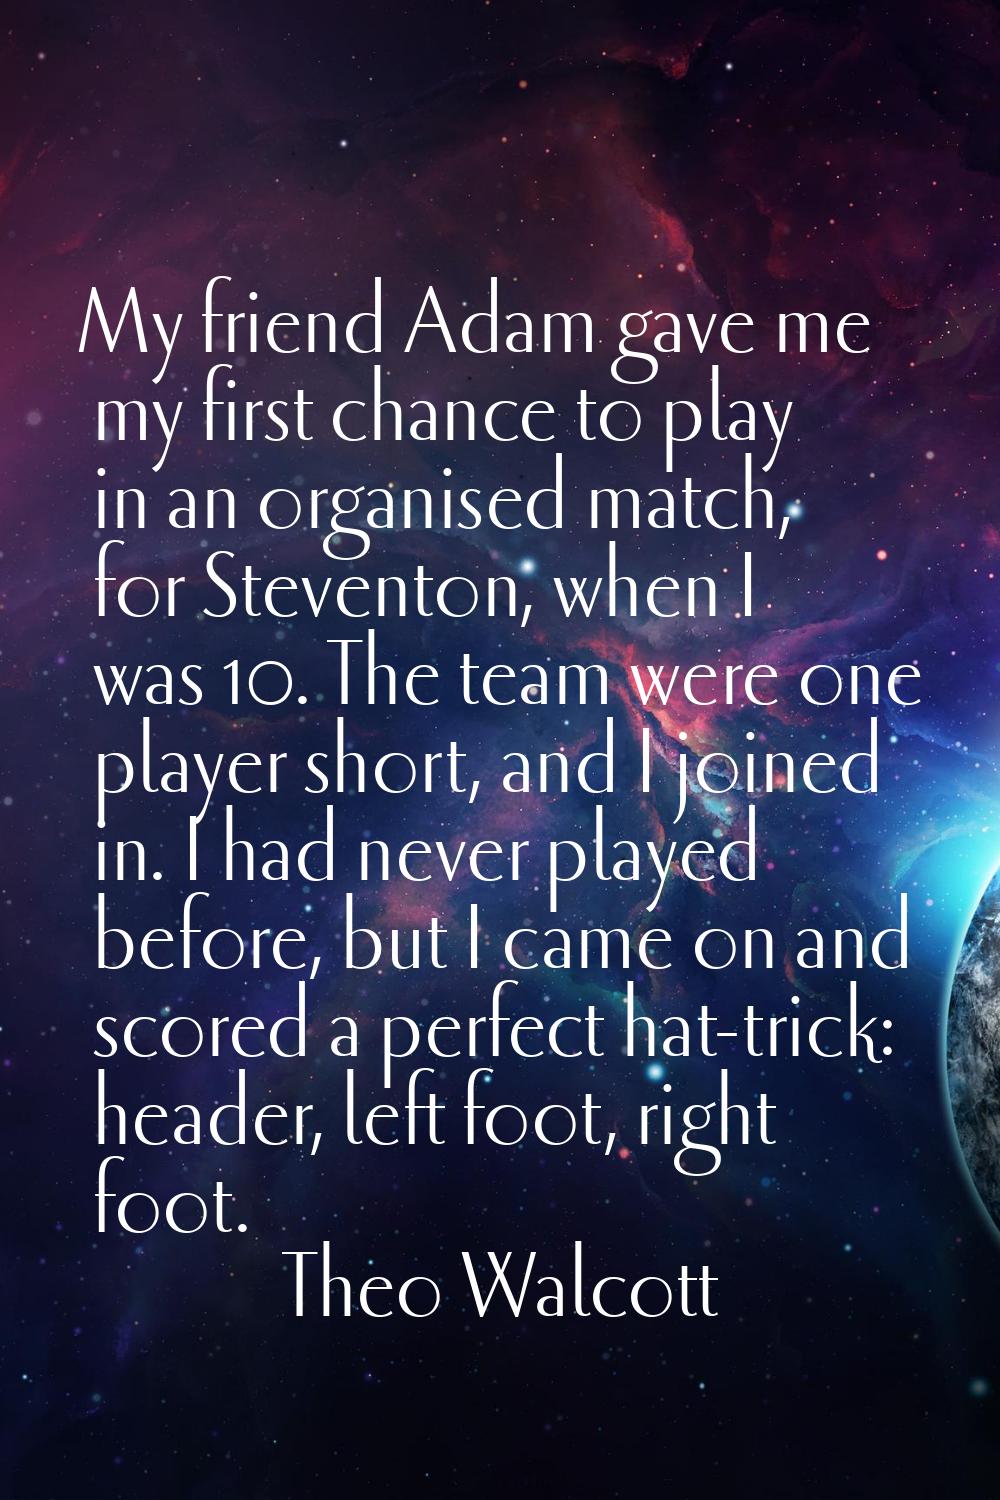 My friend Adam gave me my first chance to play in an organised match, for Steventon, when I was 10.